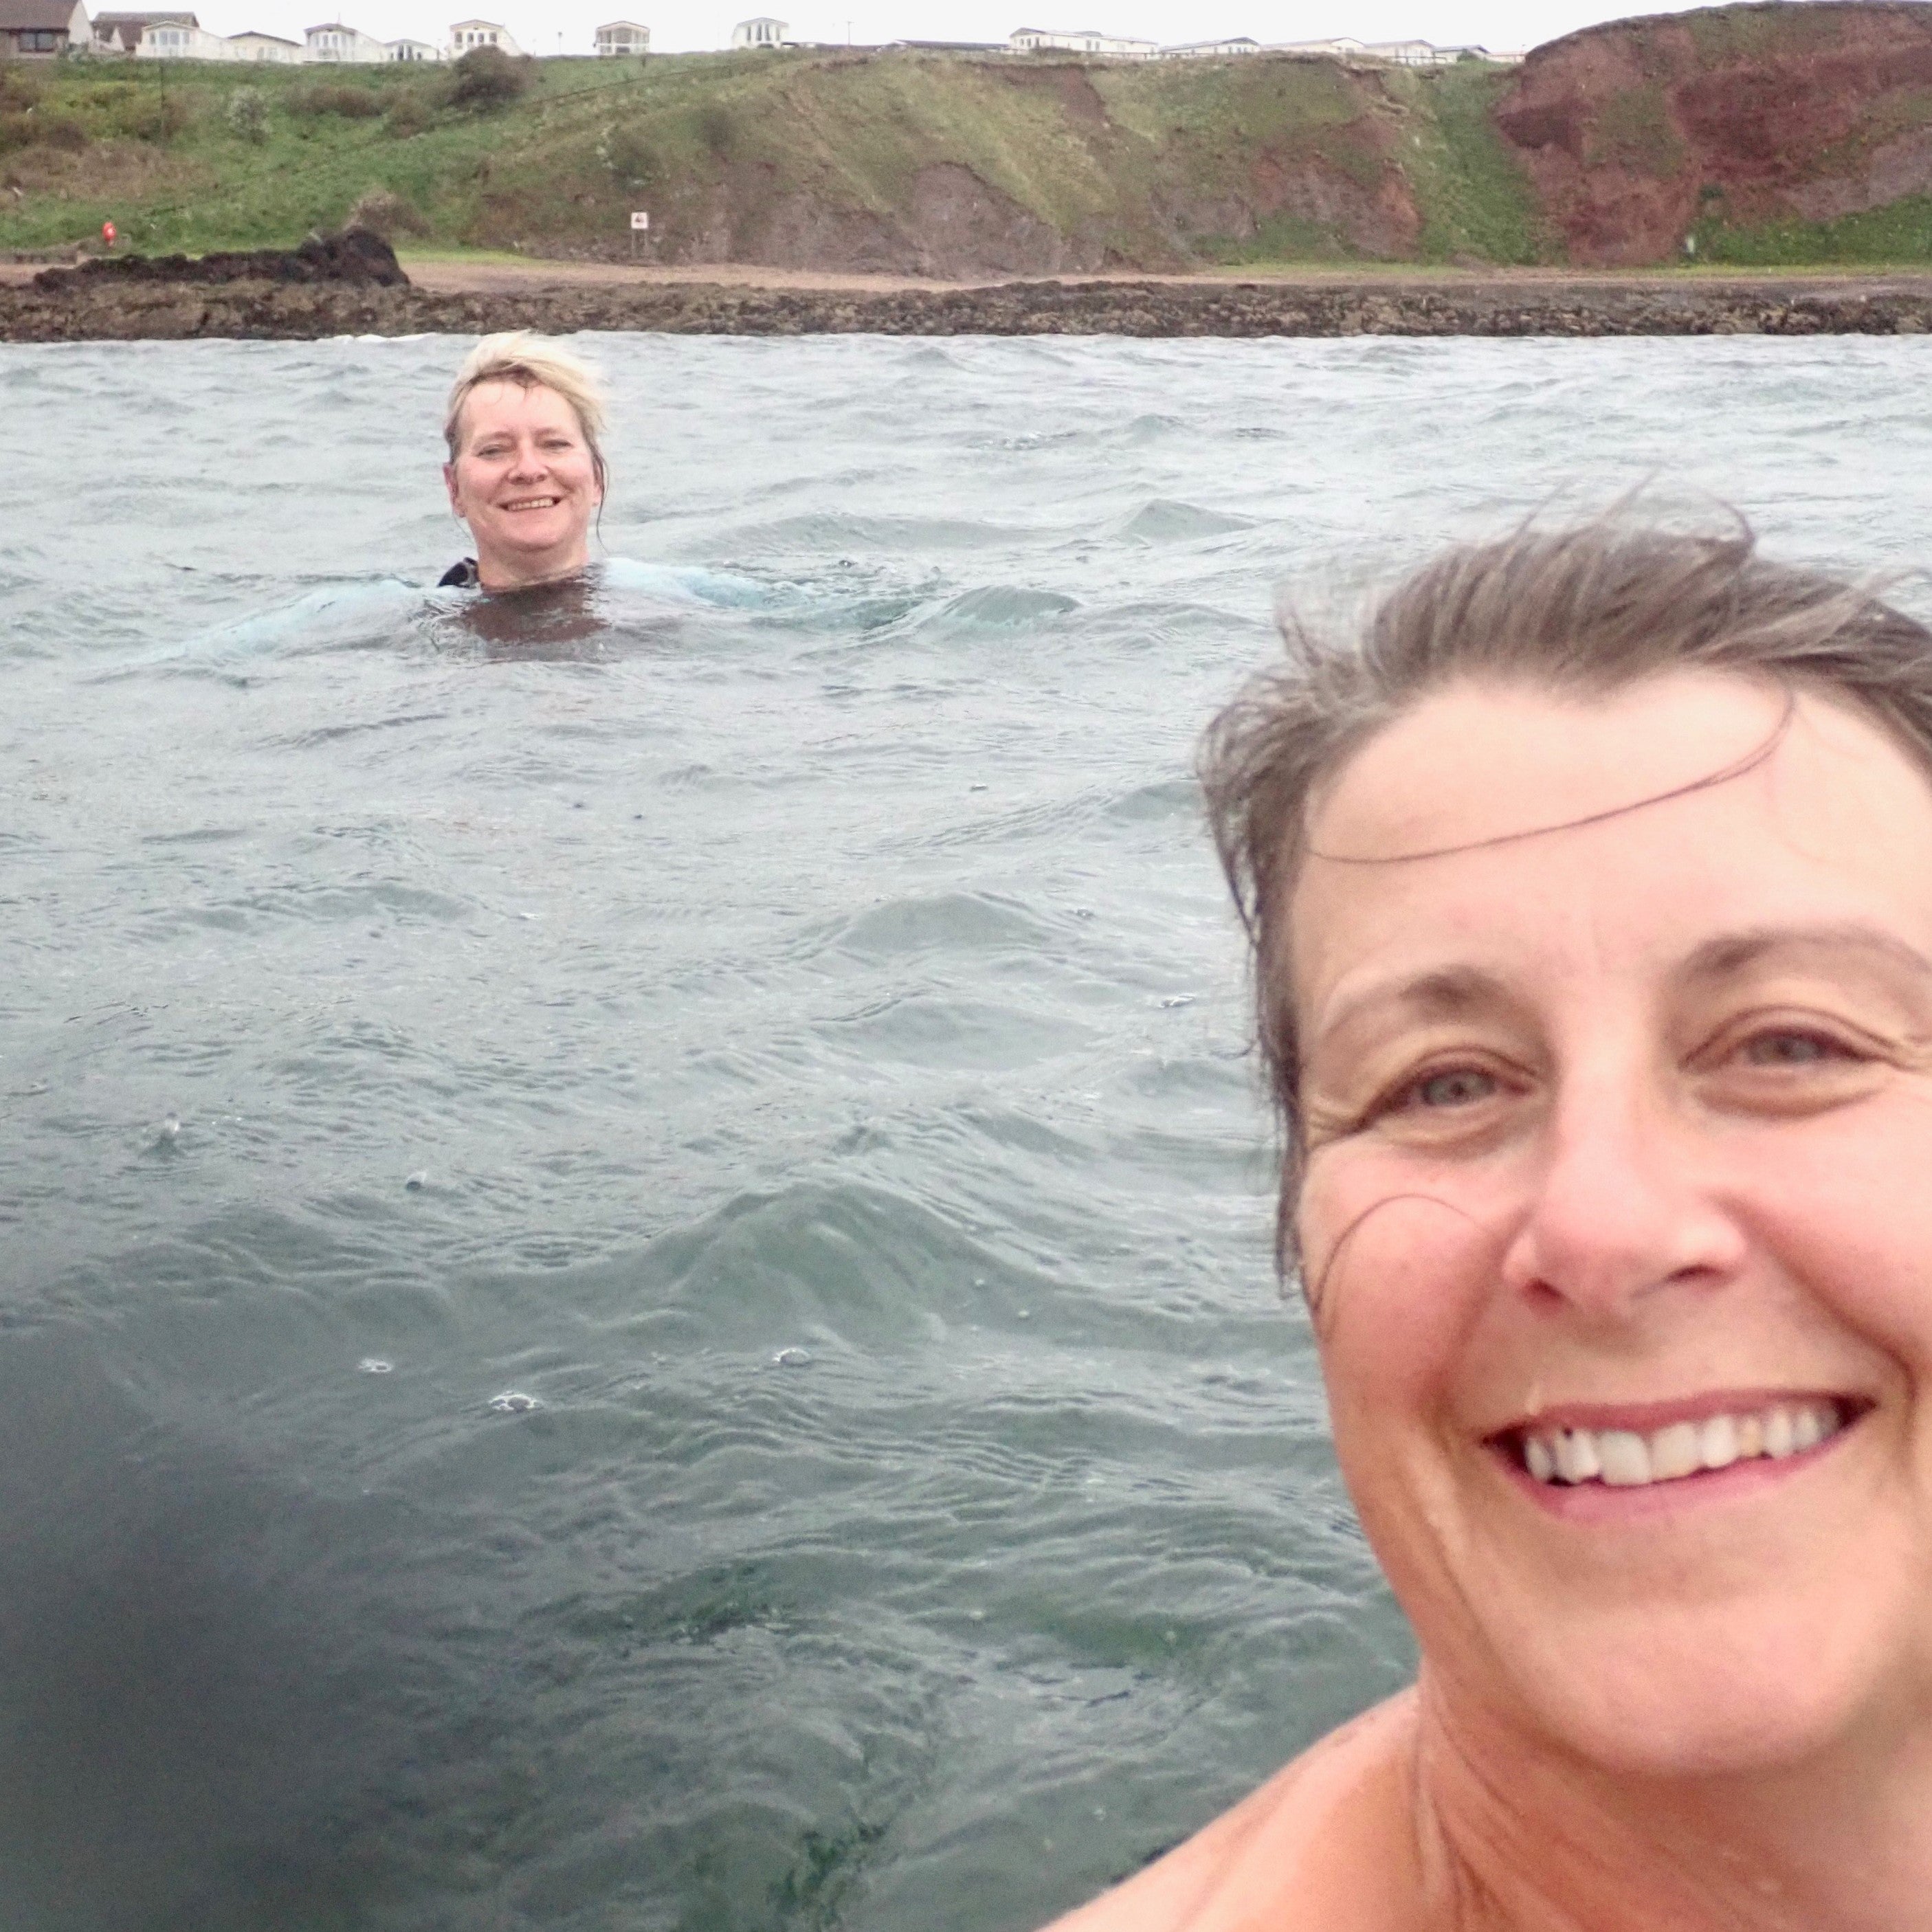 Coldingham, St Abbs and Wild Swimming